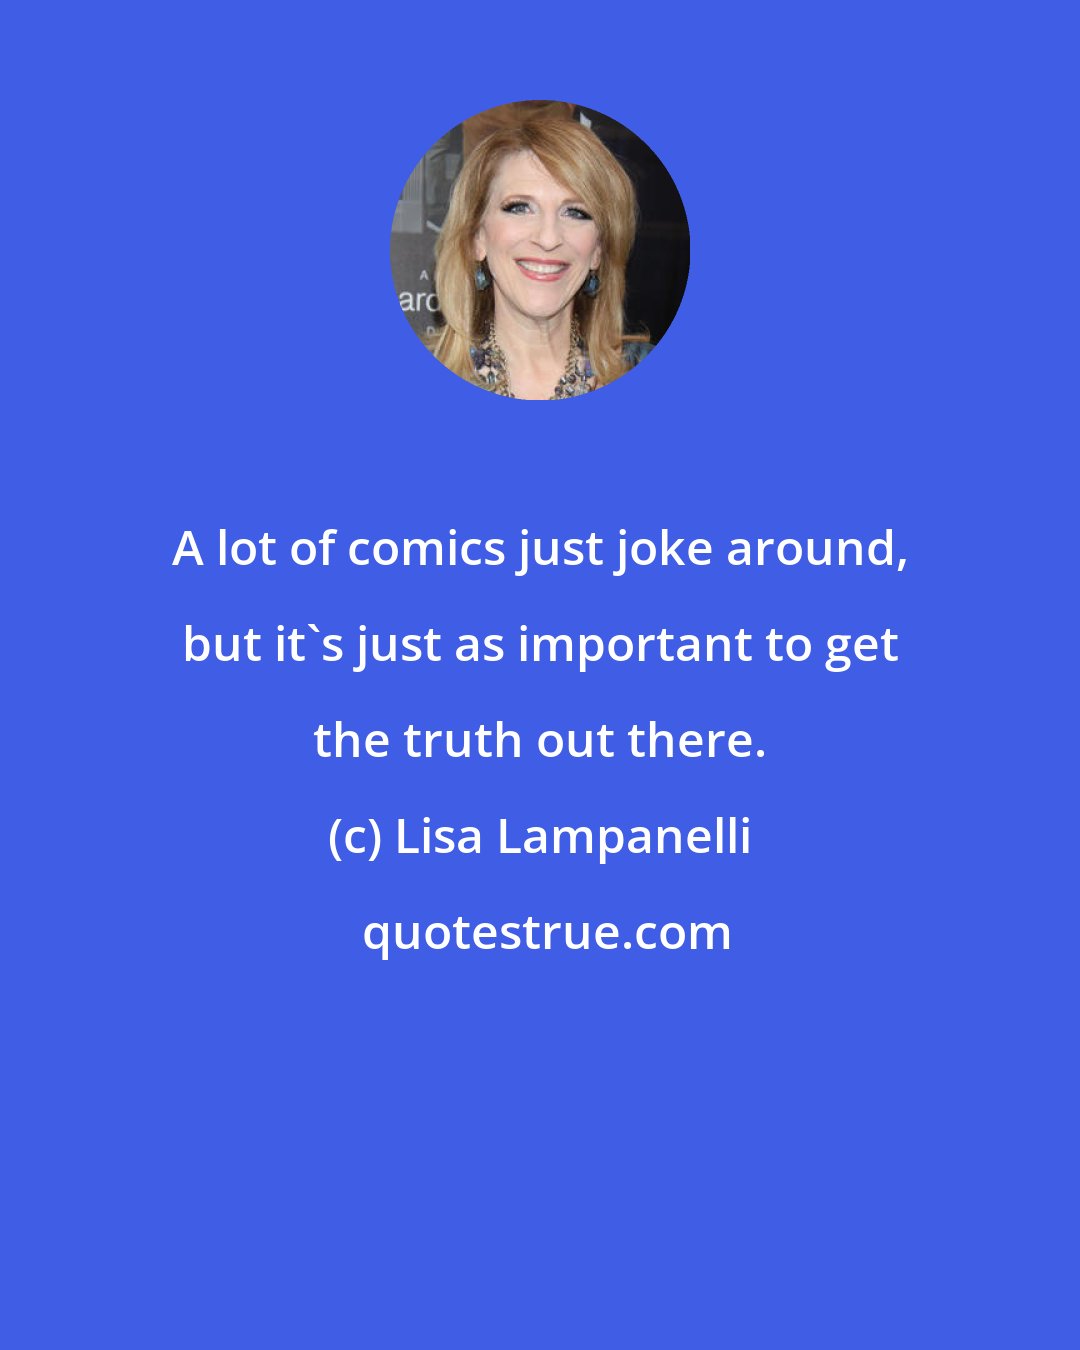 Lisa Lampanelli: A lot of comics just joke around, but it's just as important to get the truth out there.